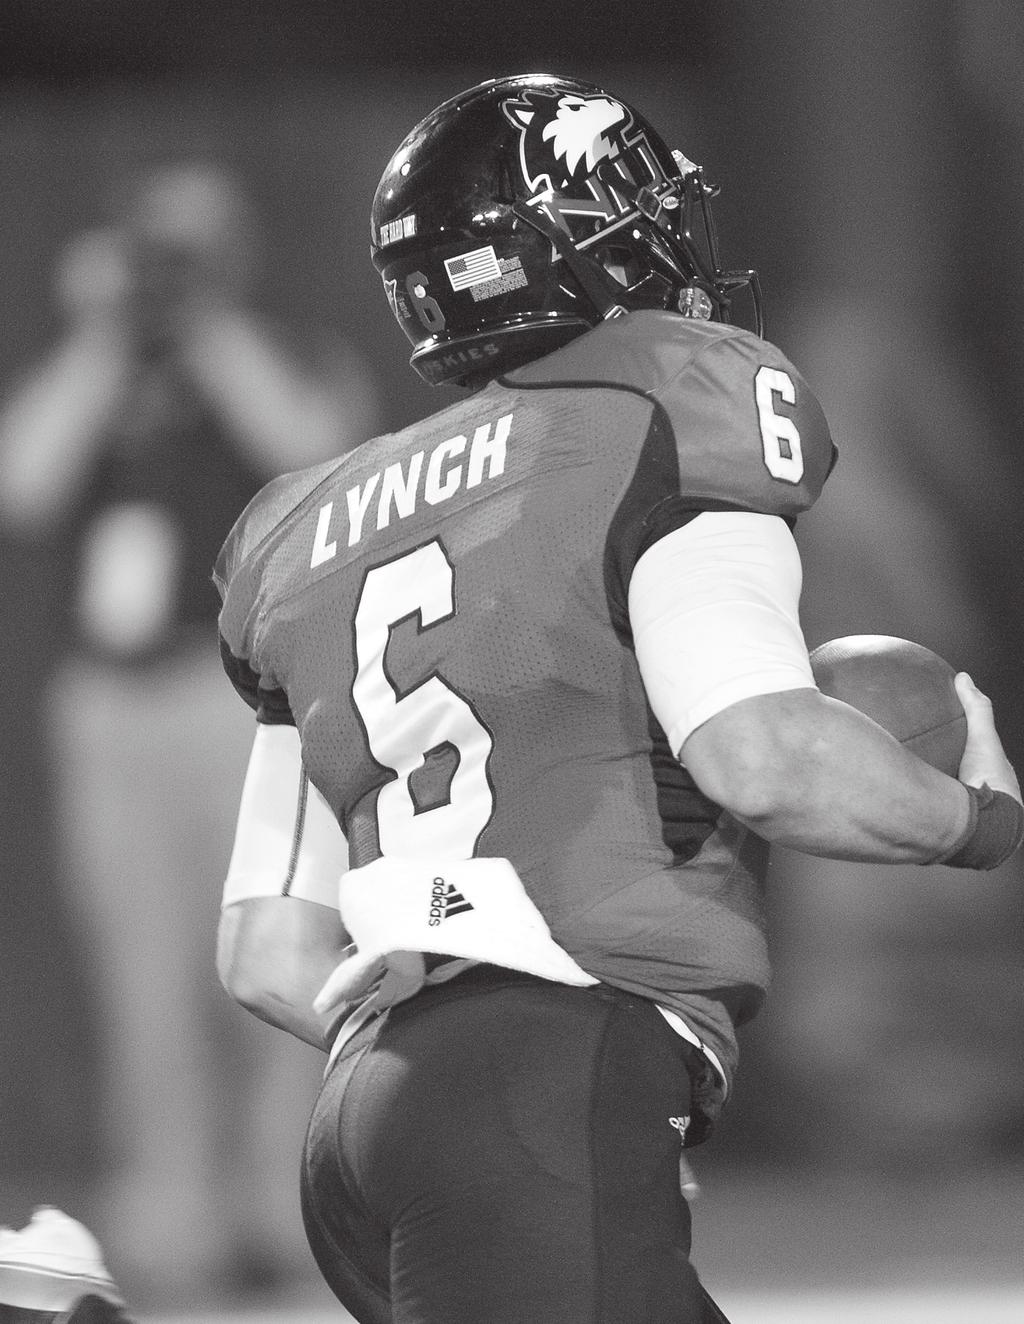 LYNCH BY THE NUMBERS NCAA LYNCH S GAME-BY-GAME CAREER STATISTICS Record as a starter: 1-1 Most Games Consecutive 1 Rushing Yards by a QB: 1 Jordan Lynch, NIU, 212 A QB Gaining 1 Yards Rushing and 3